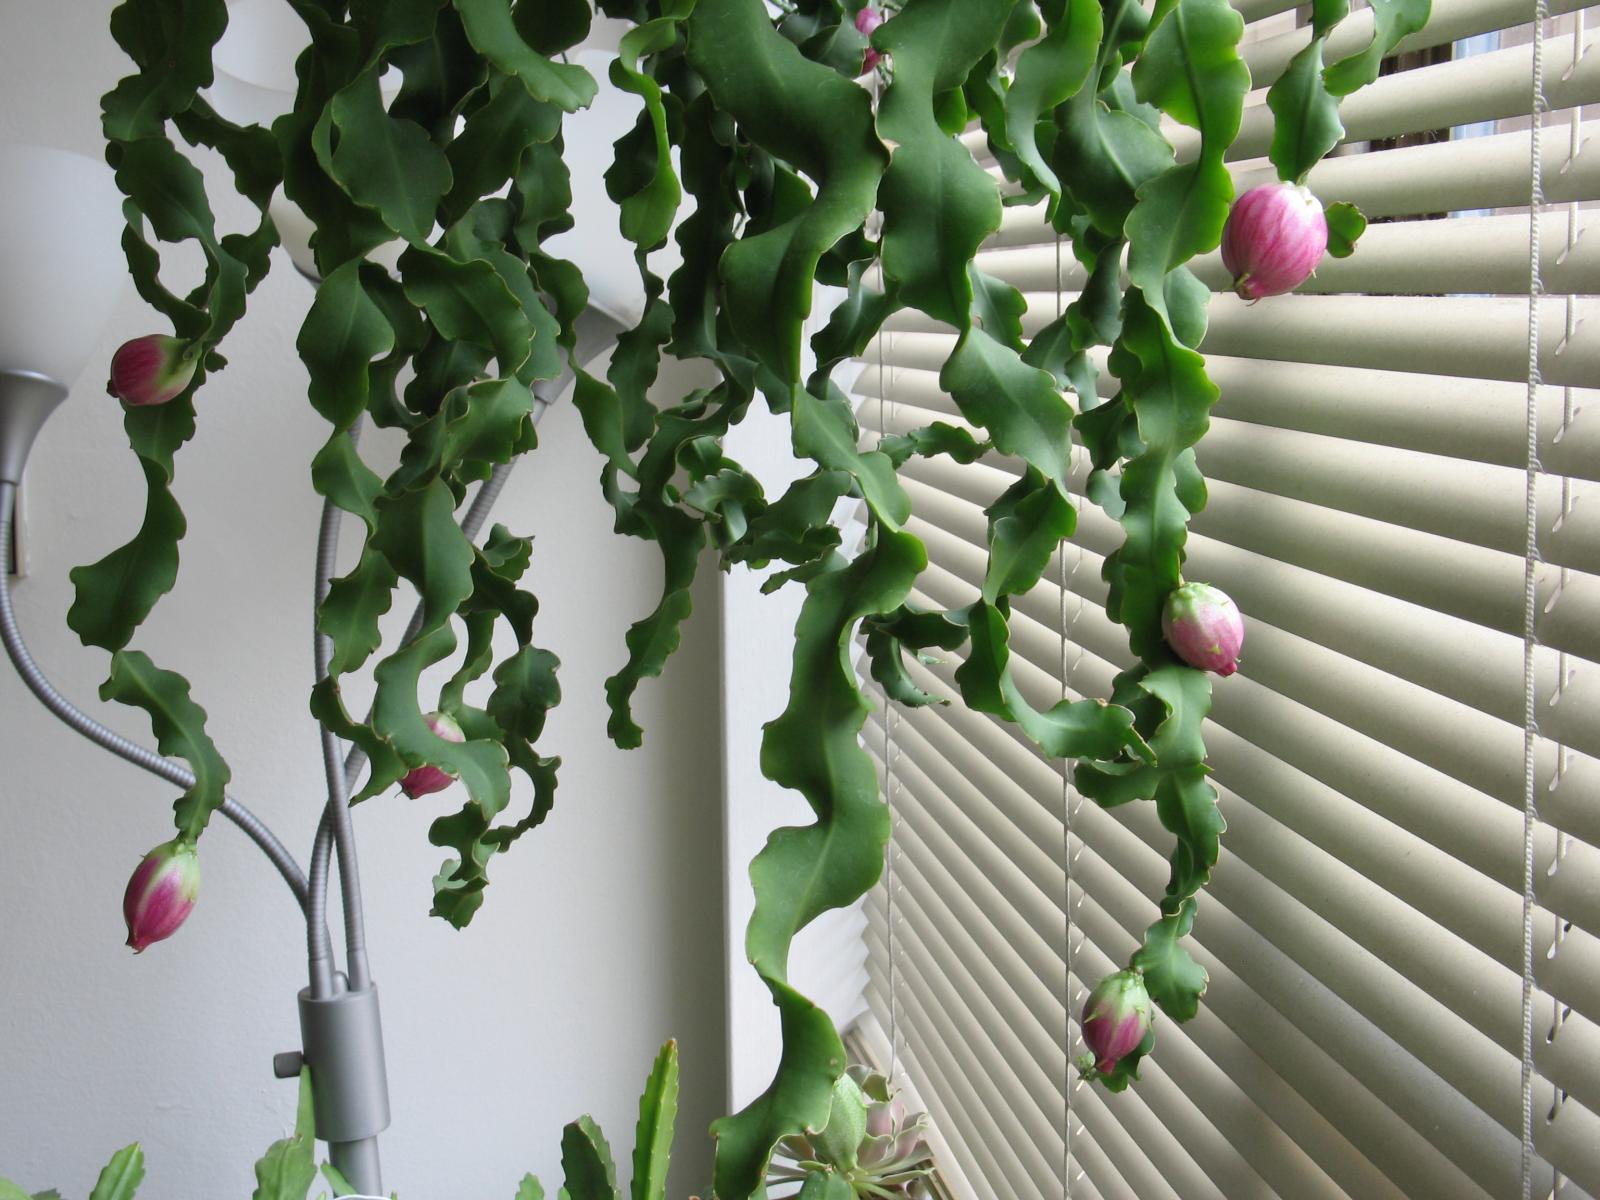 Curly Locks Orchid Cactus Care: Learn About Epiphyllum Curly Locks Plant